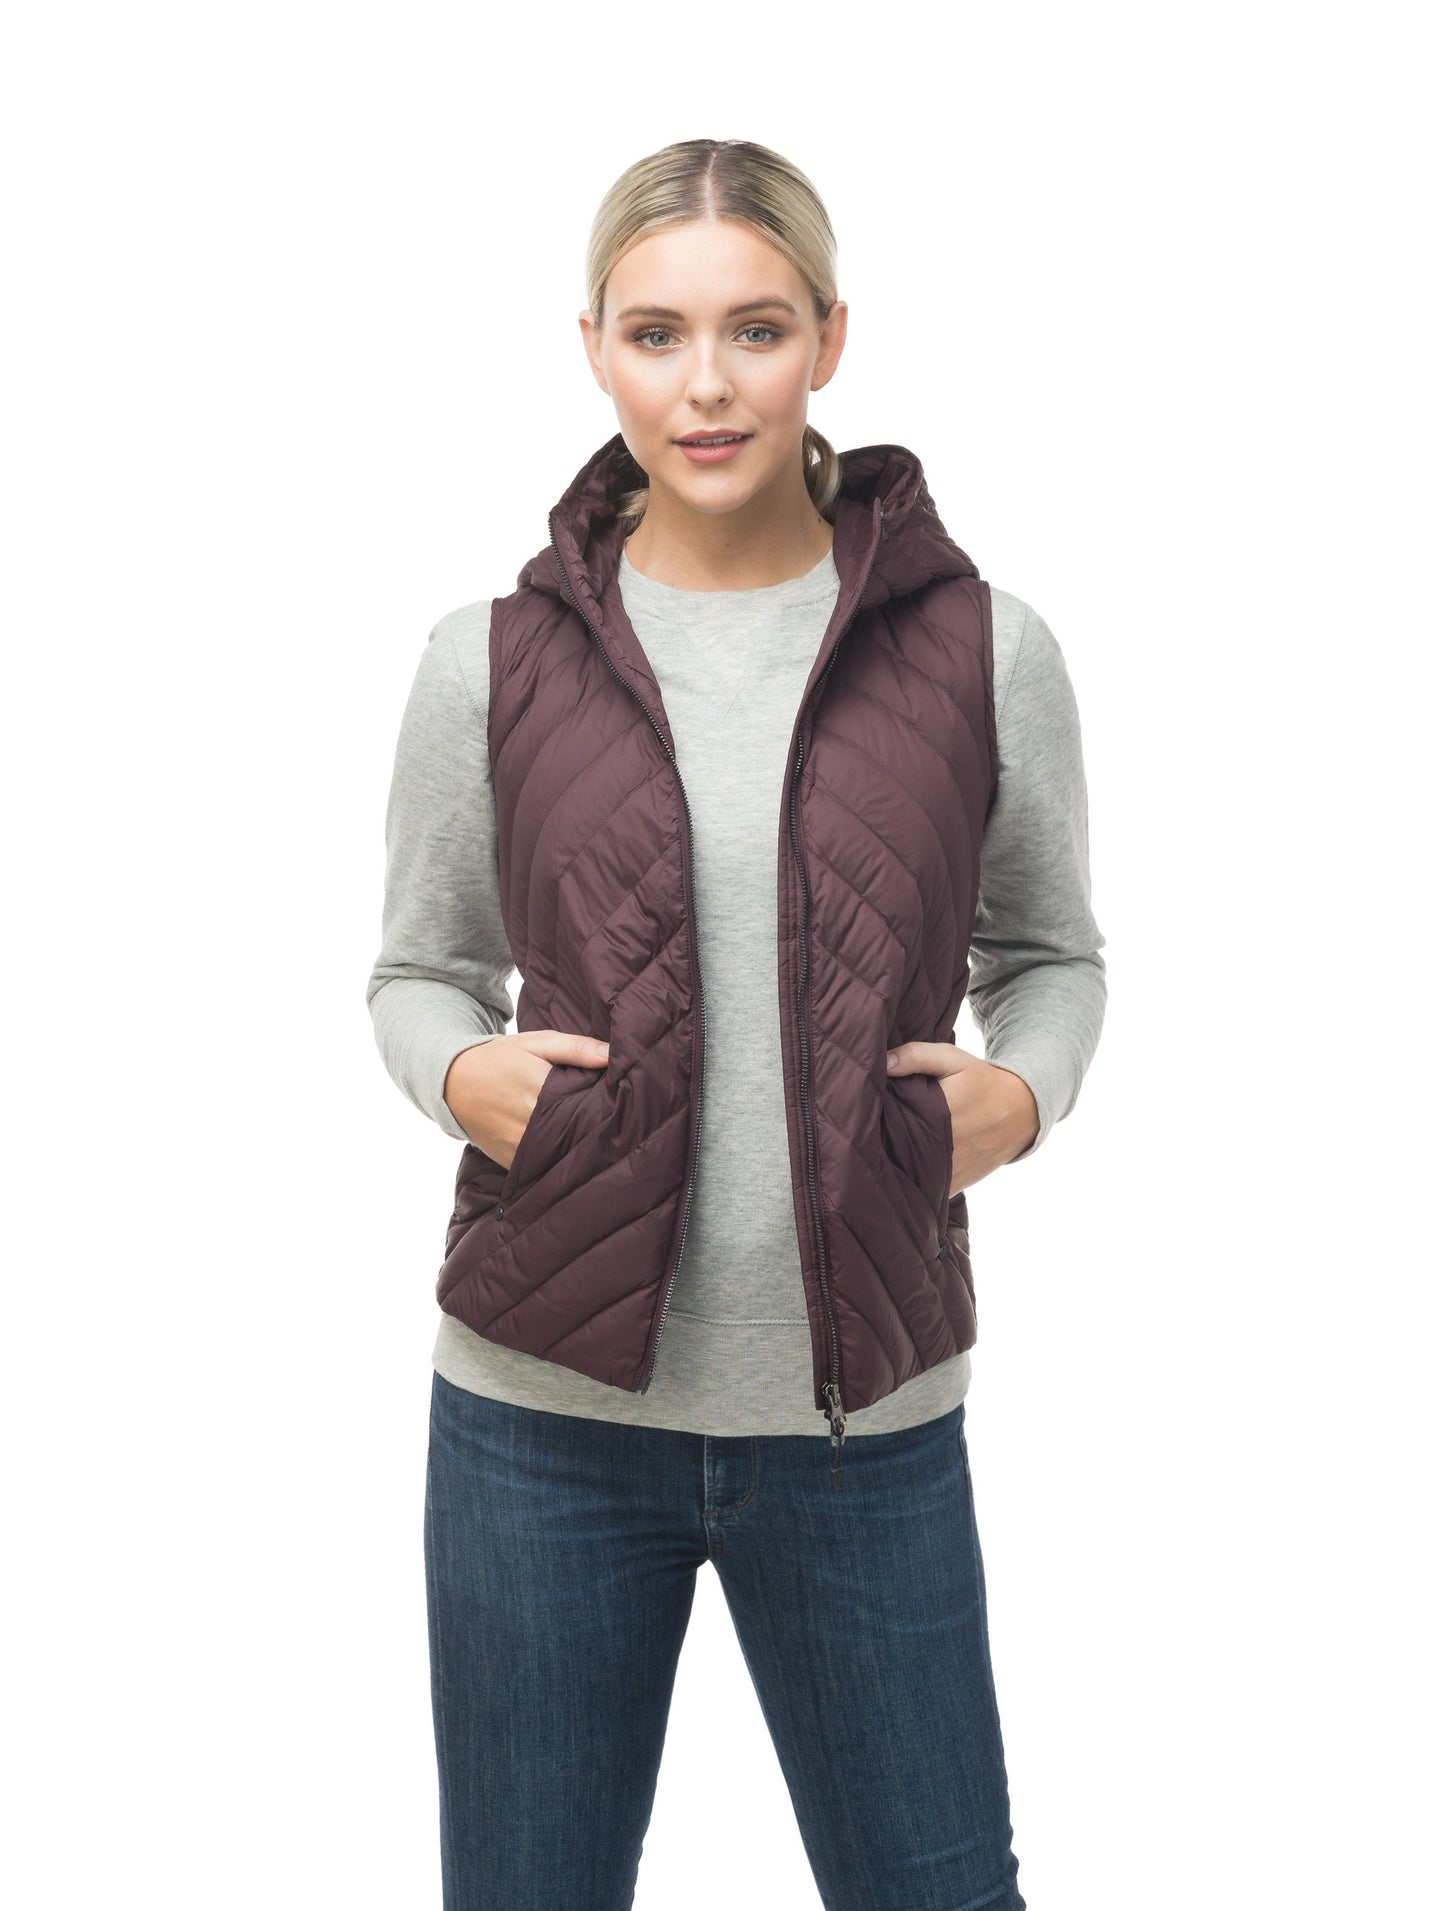 Women's down filled vest with diagonal quilting pattern throughout in Burgundy